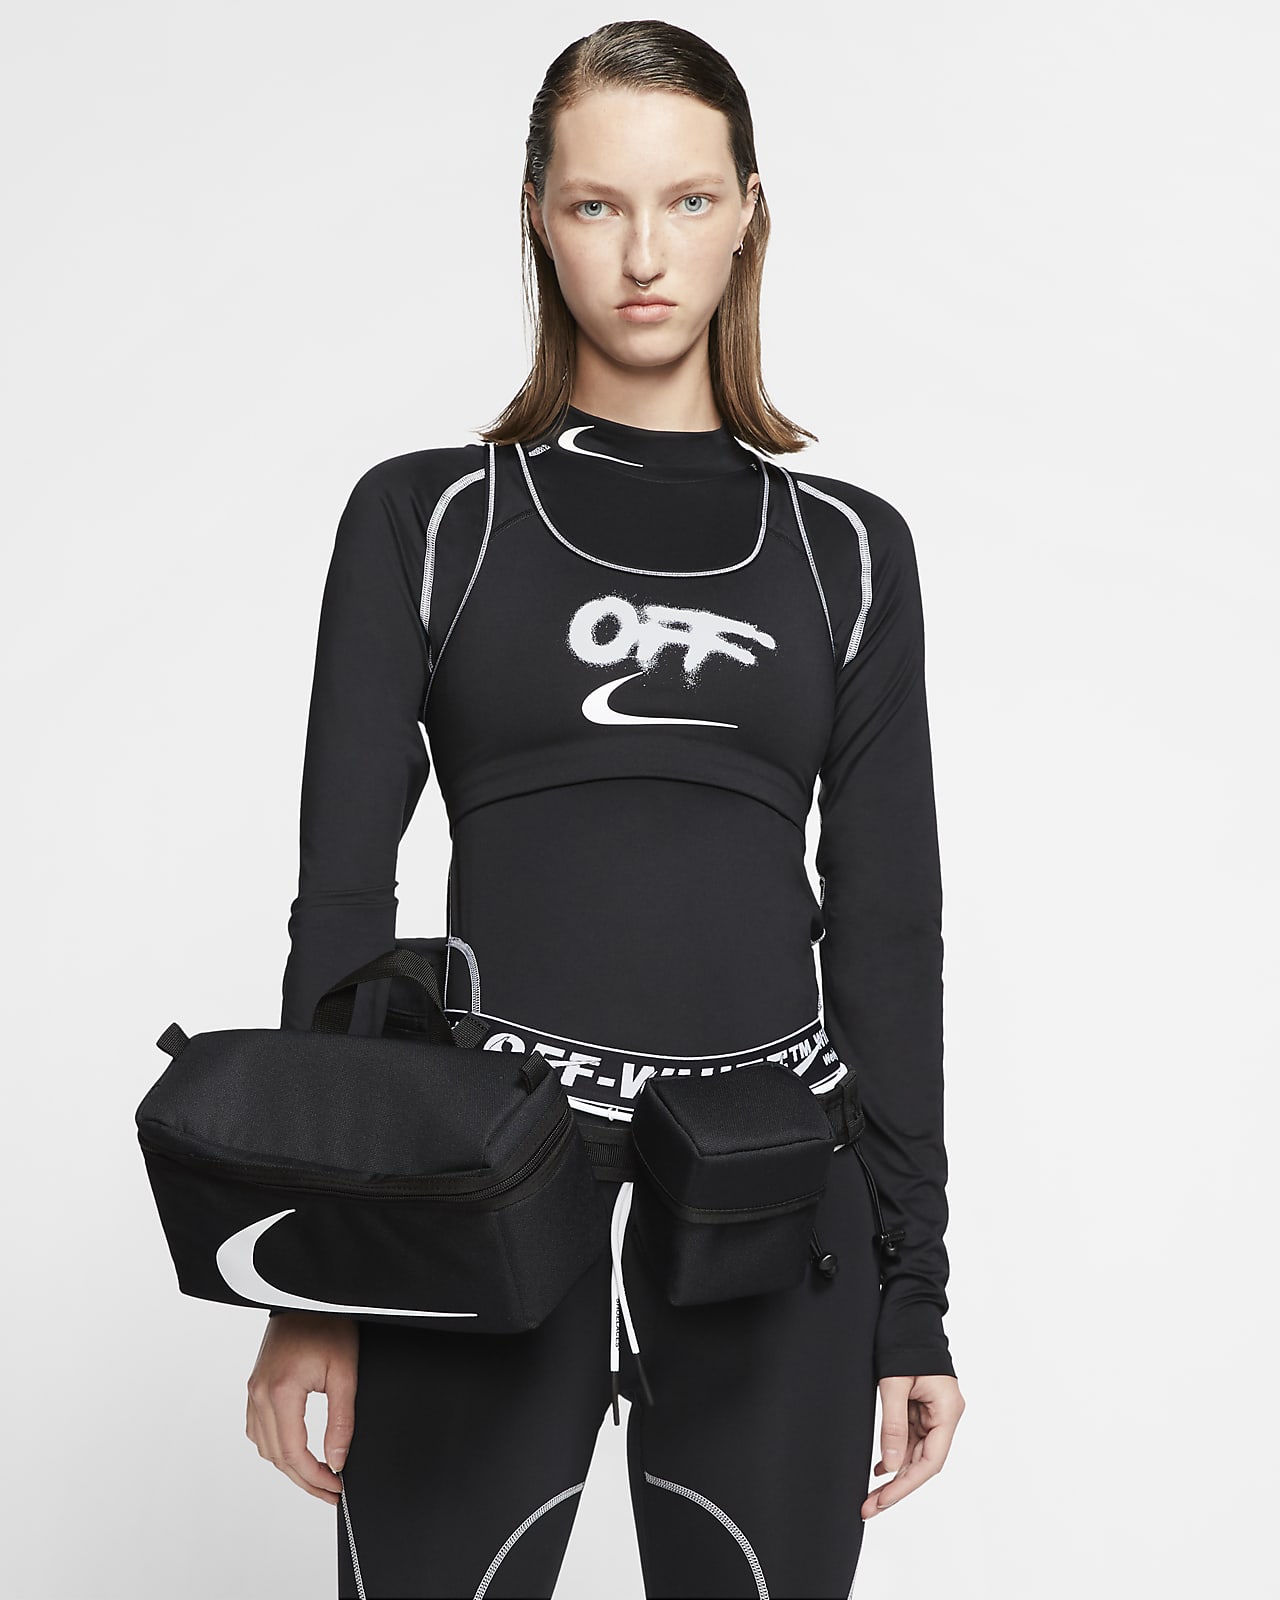 off white nike fanny pack